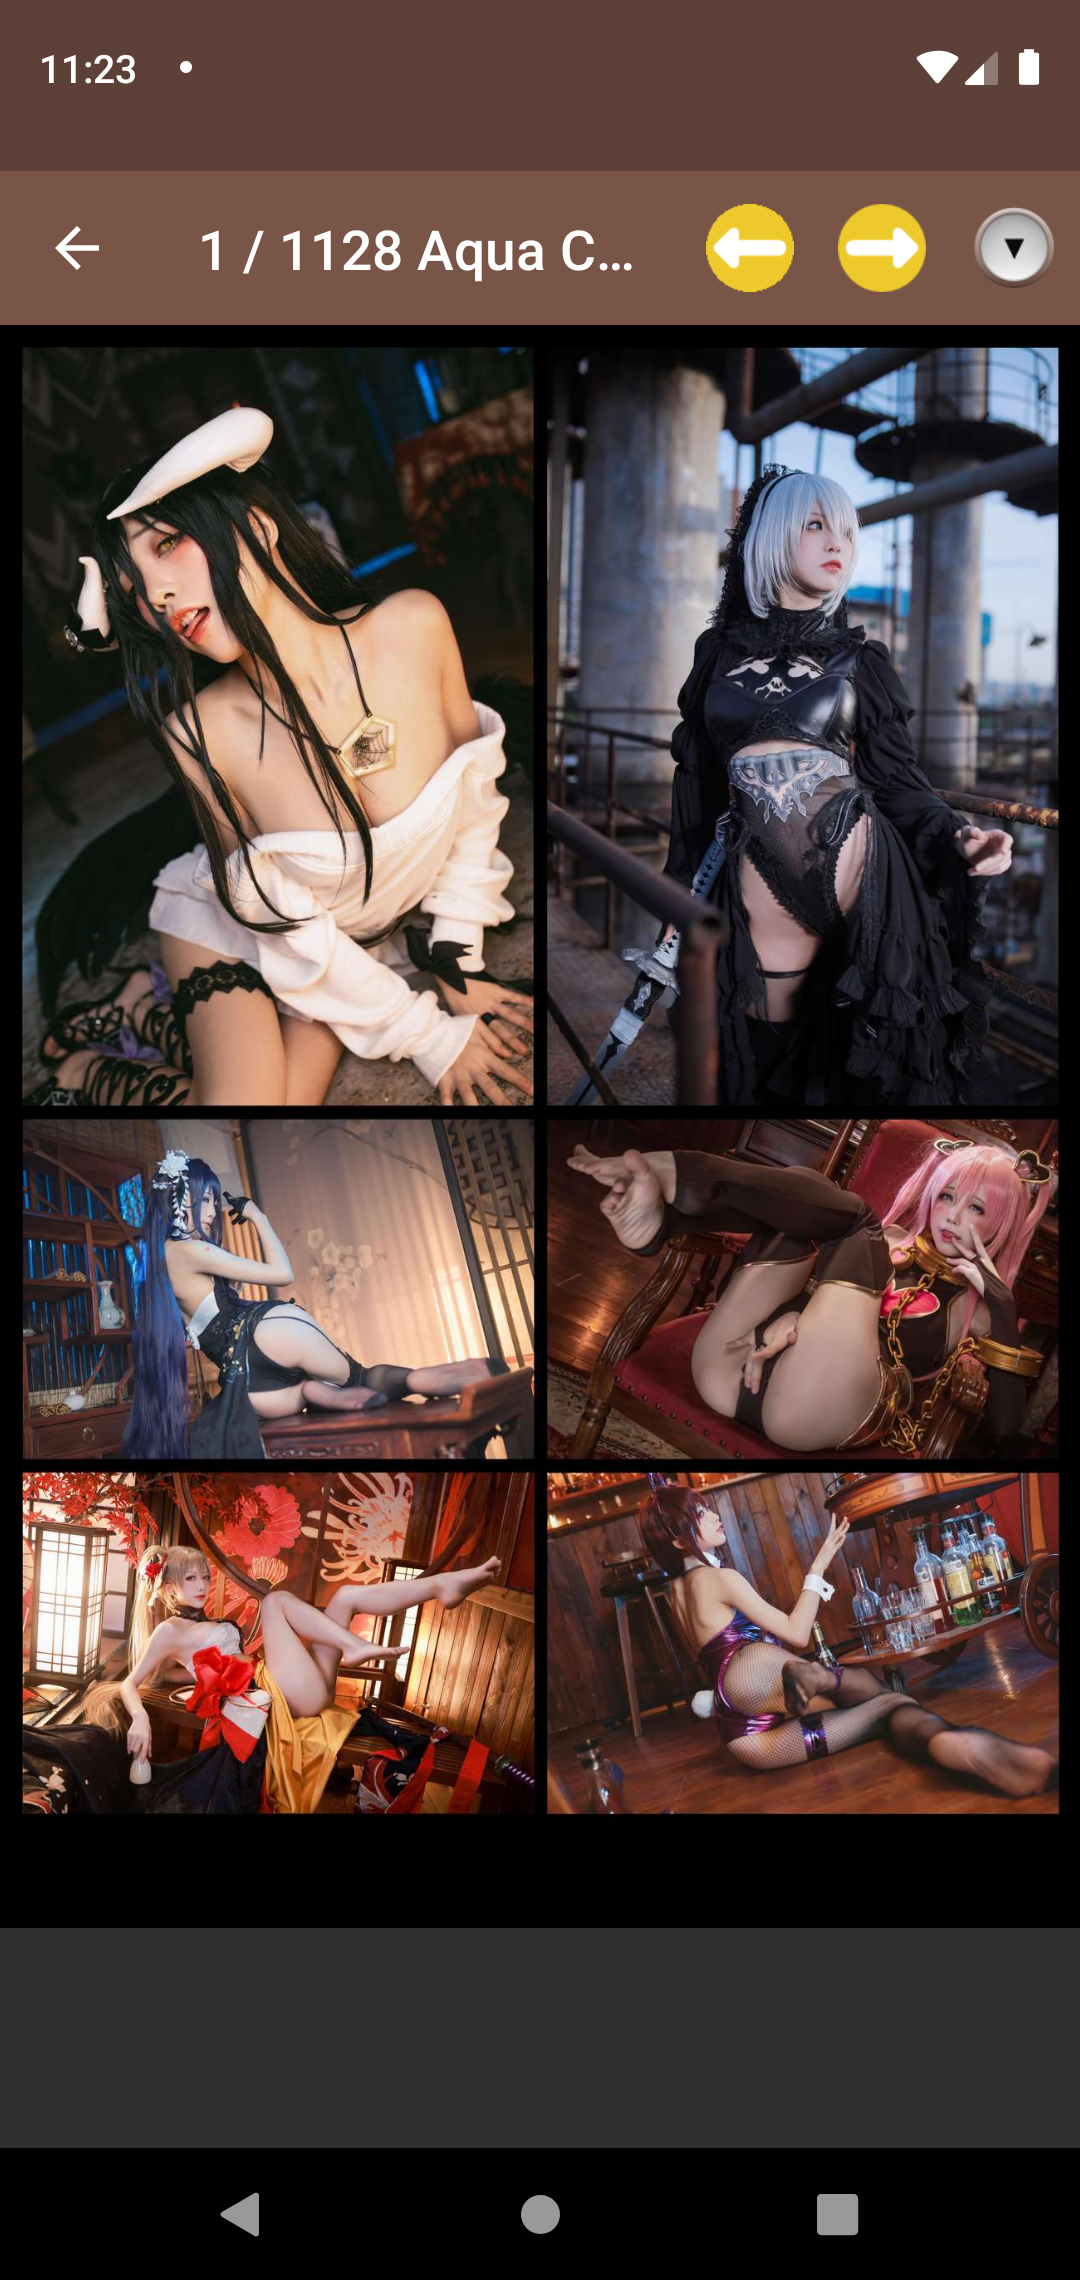 Aqua Cosplay titty,dicks,pictures,image,pics,photos,apk,app,with,pic,daily,gallery,collection,comics,for,apps,hentia,chicks,adult,hentai,pornstar,porn,wallpaper,best,gallerys,cosplay